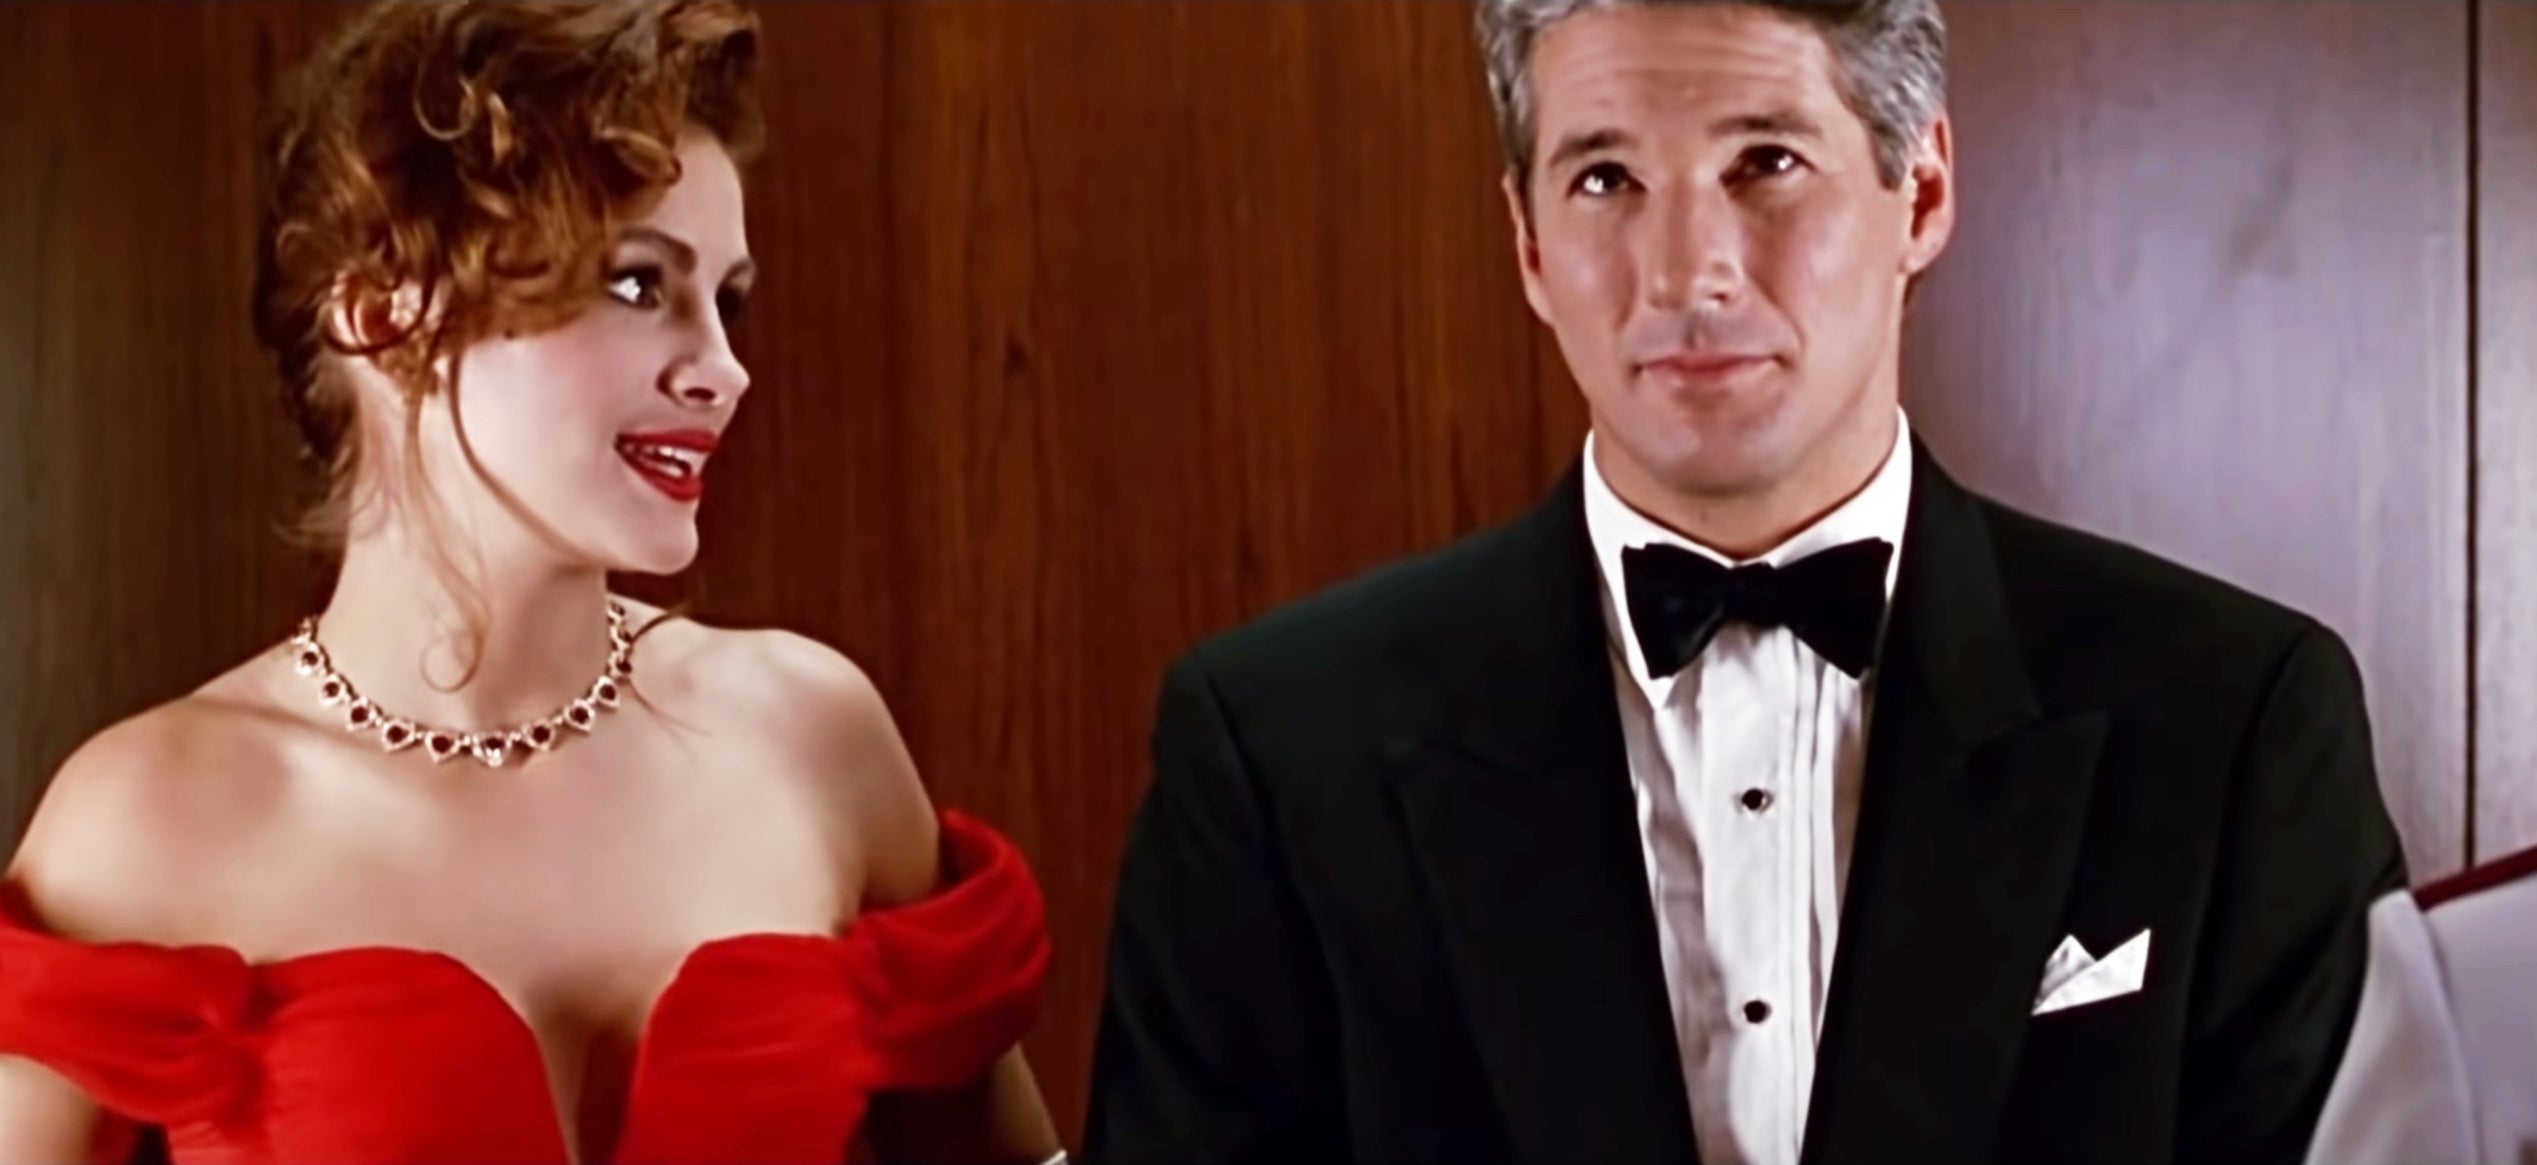 Two actors in formal attire; a woman in a red off-shoulder dress and a man in a black tuxedo, standing side by side